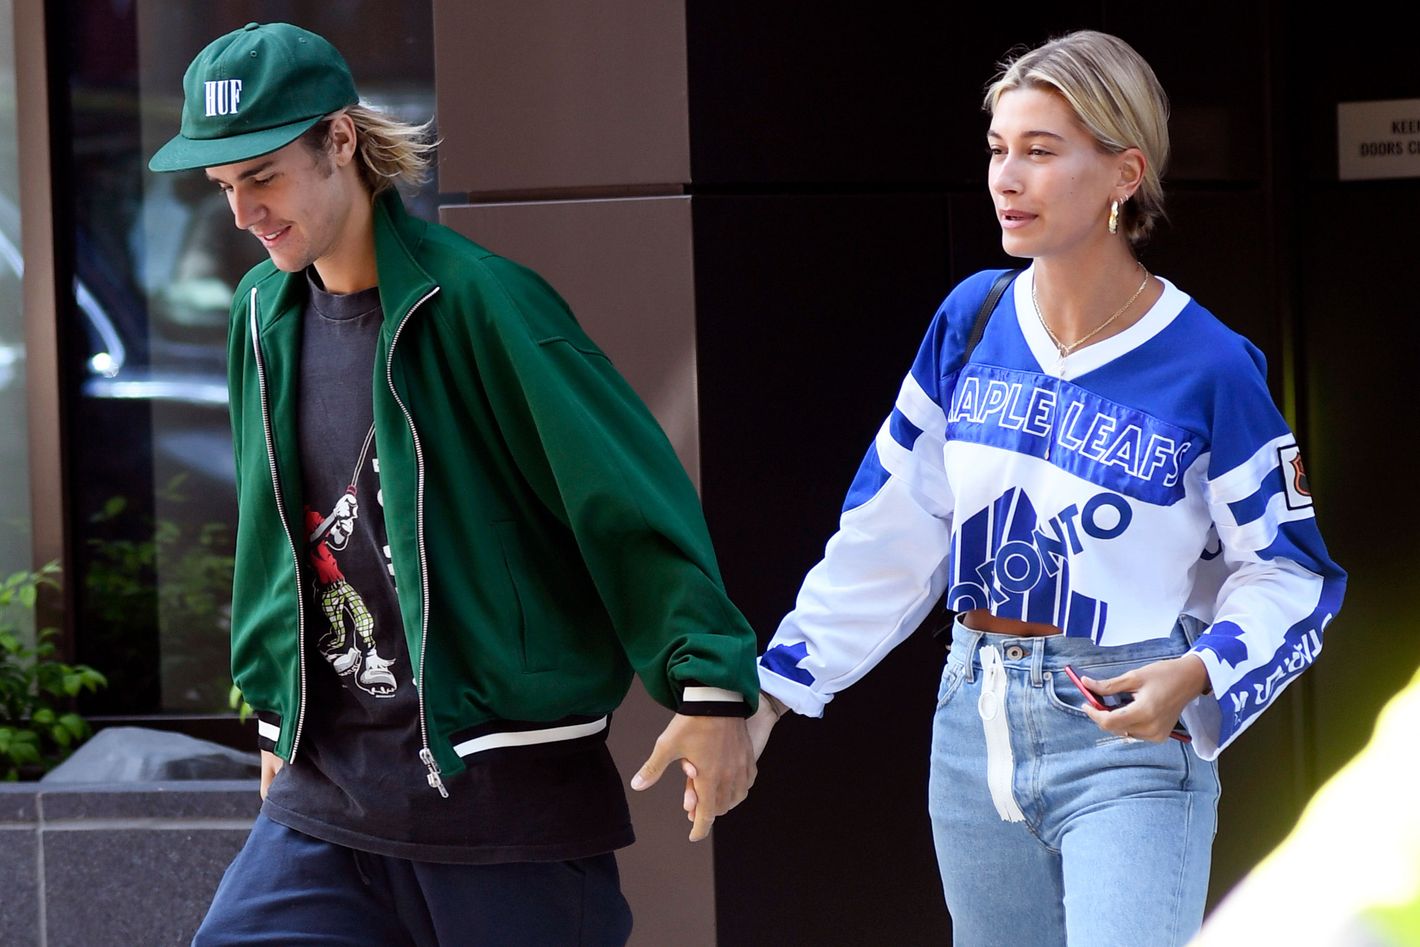 Justin Bieber and Hailey Baldwin wear matching his and hers jerseys to  catch a hockey game in Canada